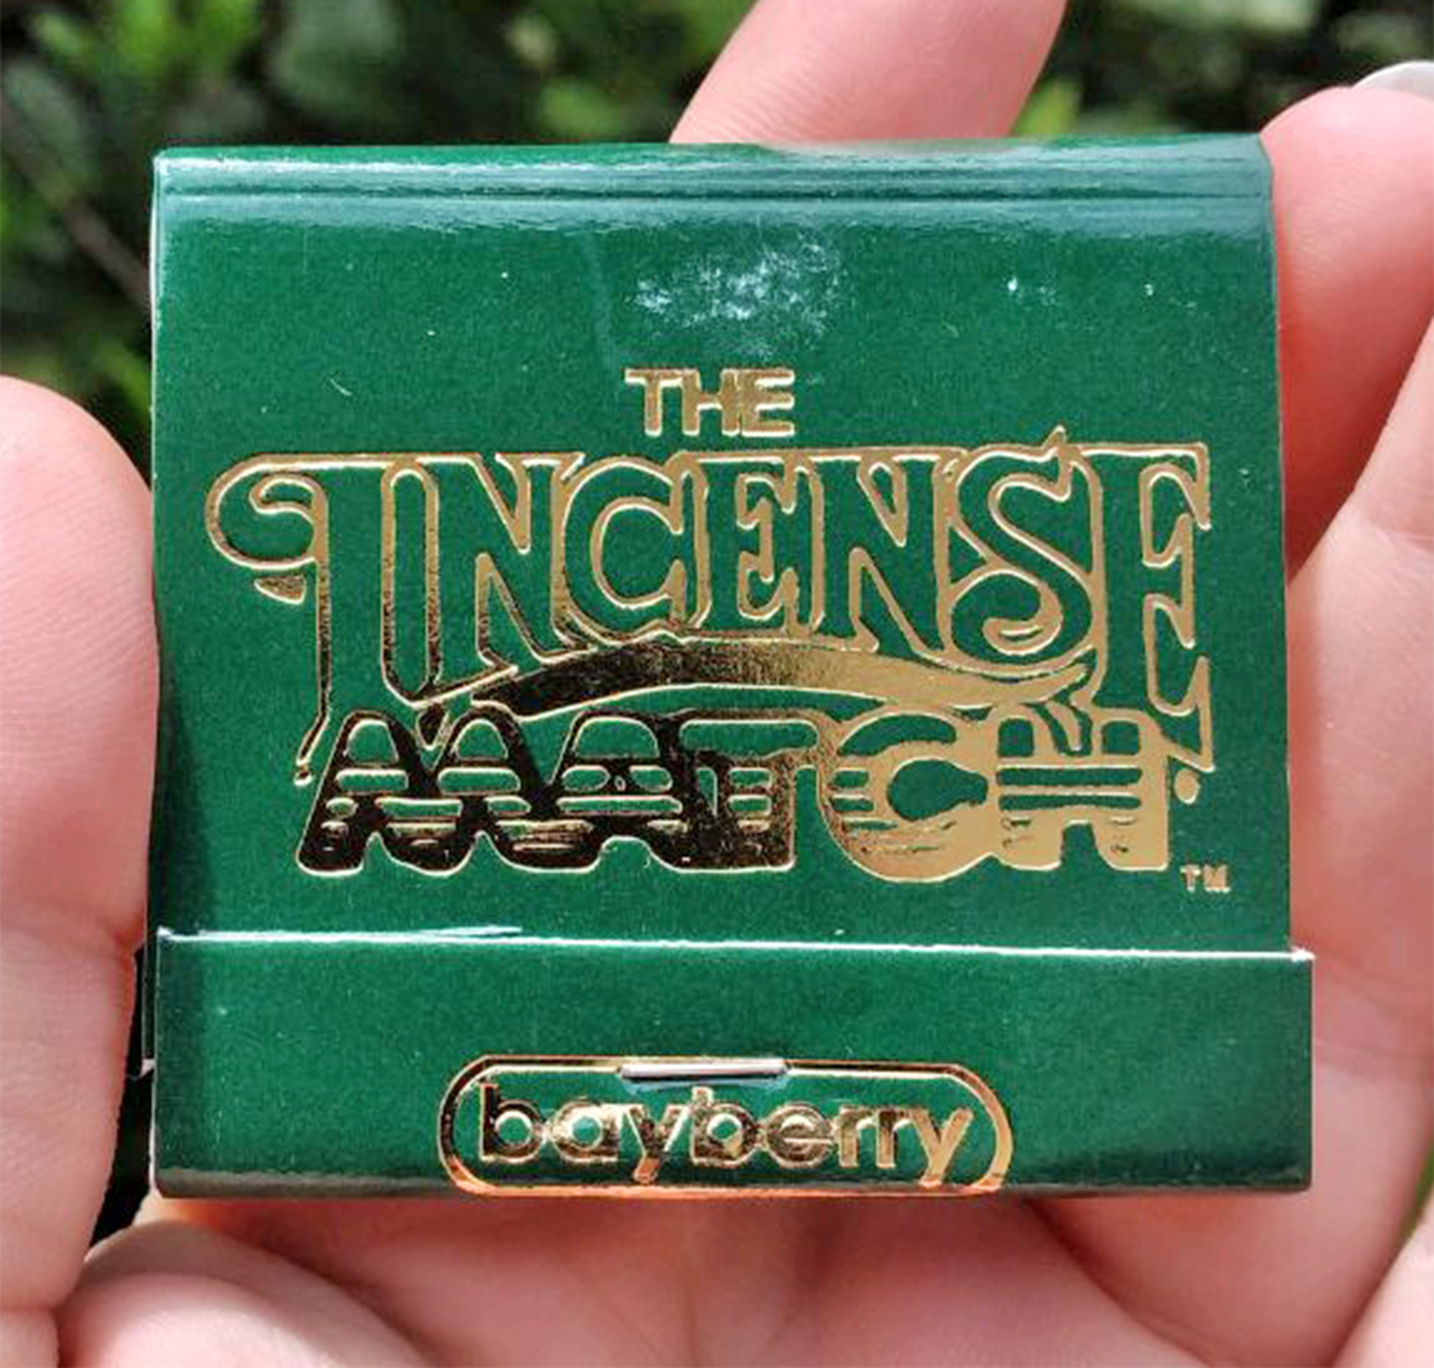 Incense Matchbook - Scented Matches for Meditation &amp; Rituals - Bayberry